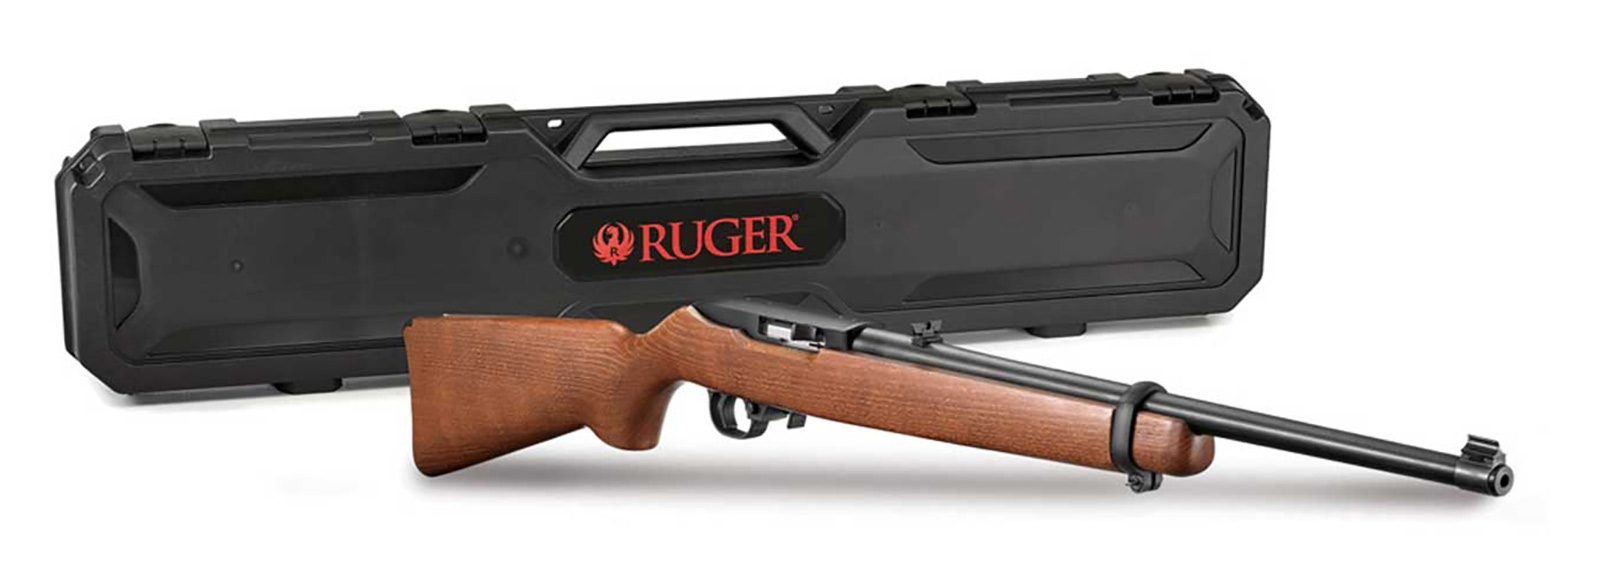 ruger-10-22-22lr-18-5-10rd-w-flam-case-spn-trgt-semi